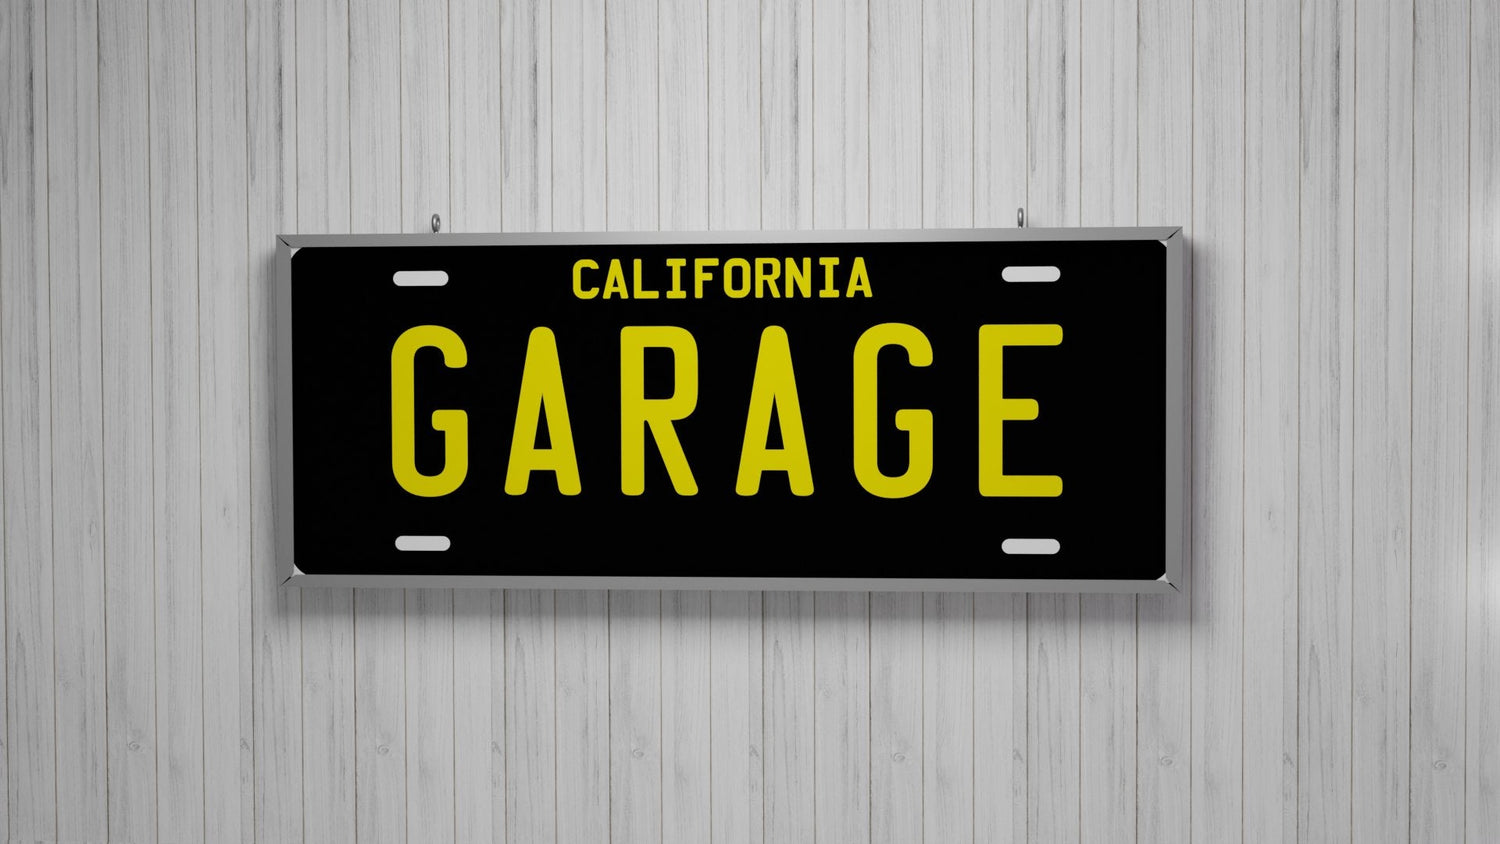 LICENSE PLATE THEMED SIGNS